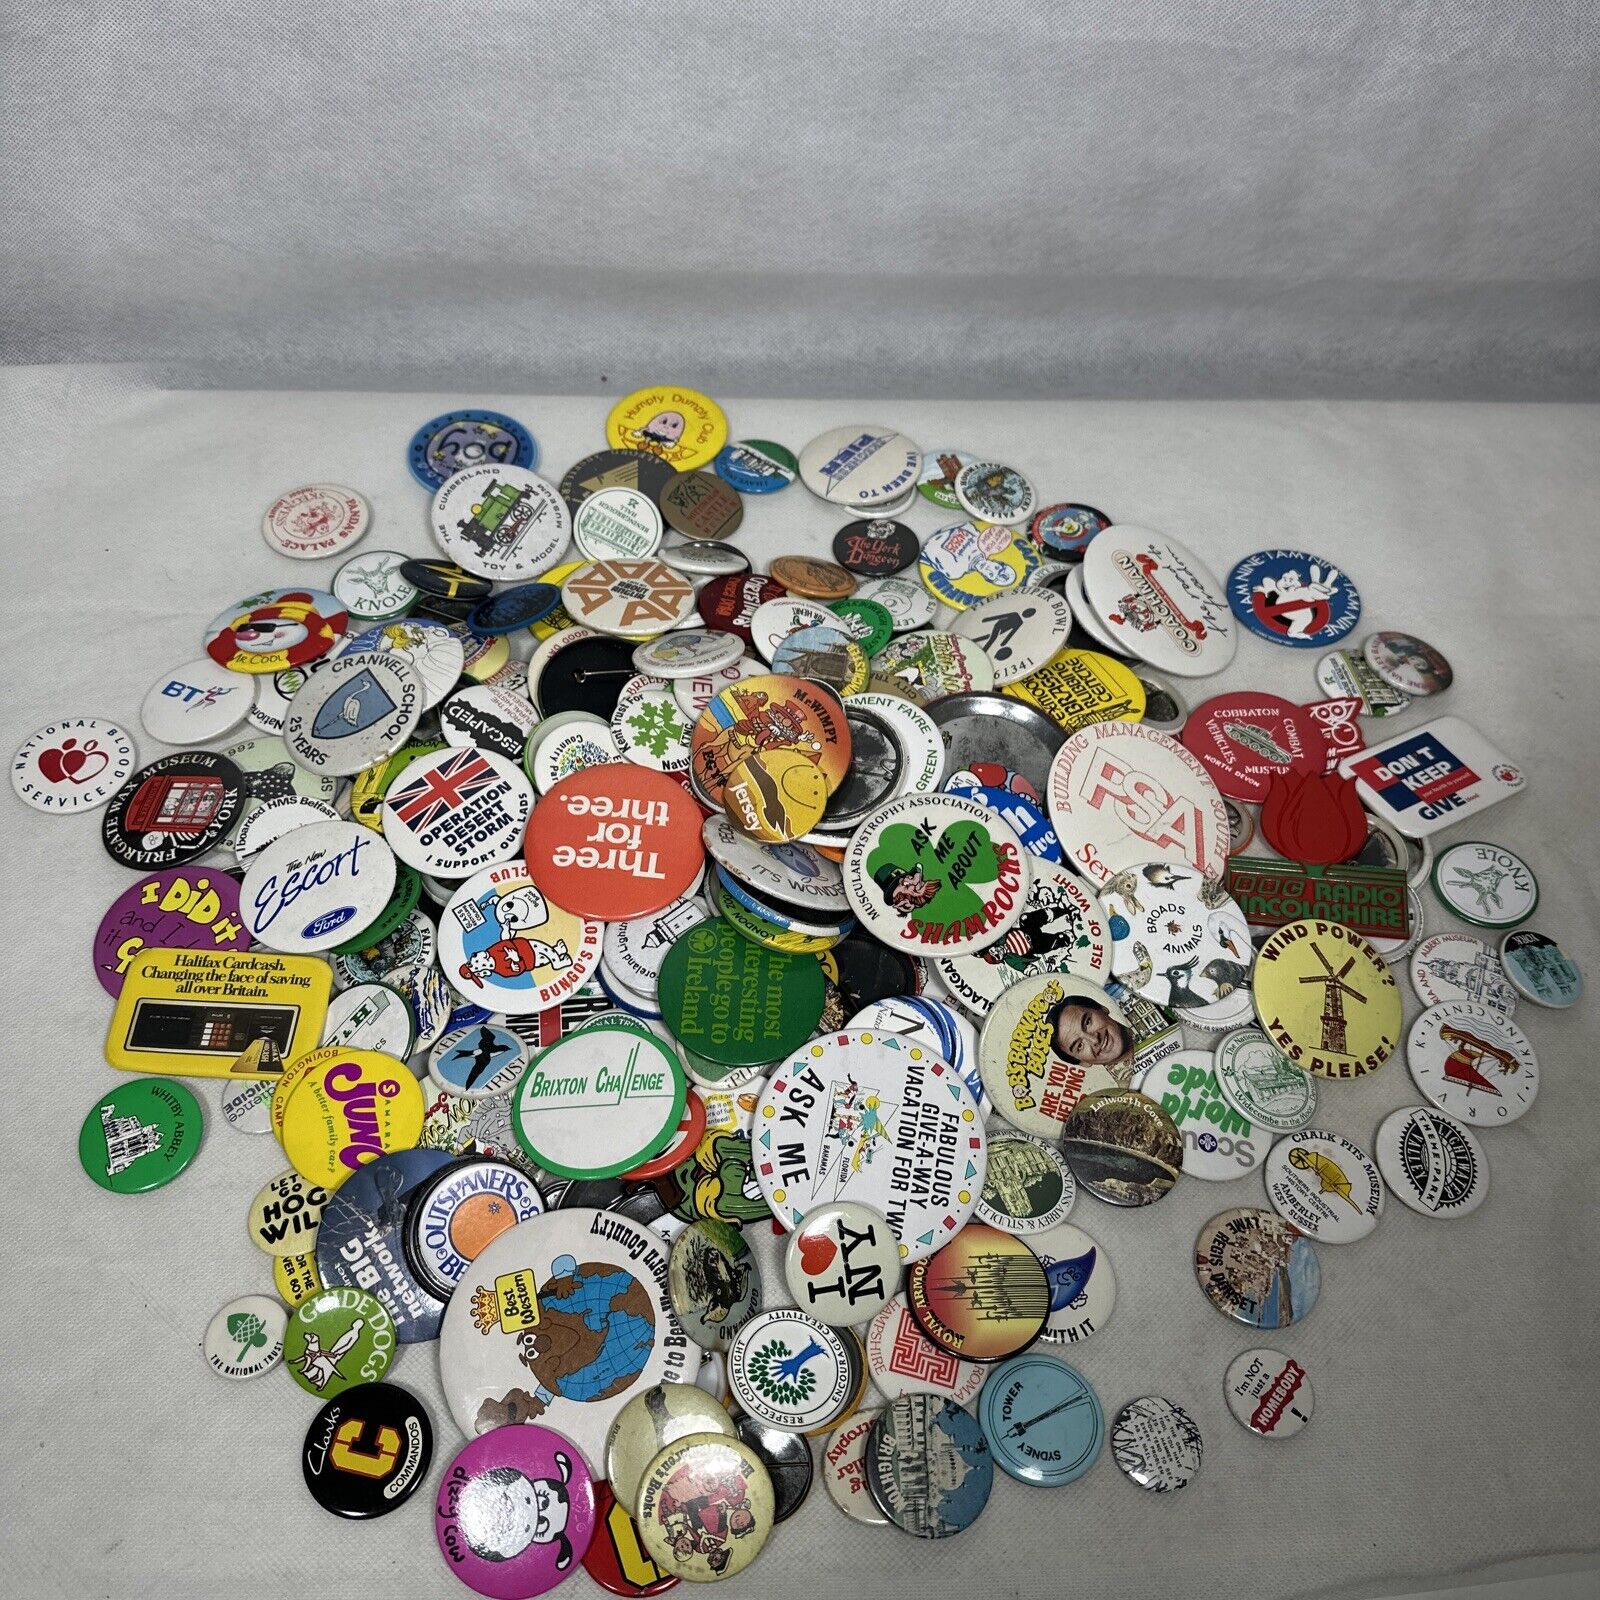 JOB LOT OF 246 VINTAGE 1970/80/90s ADVERTISING BADGES Plus Others...IDEAL RESALE